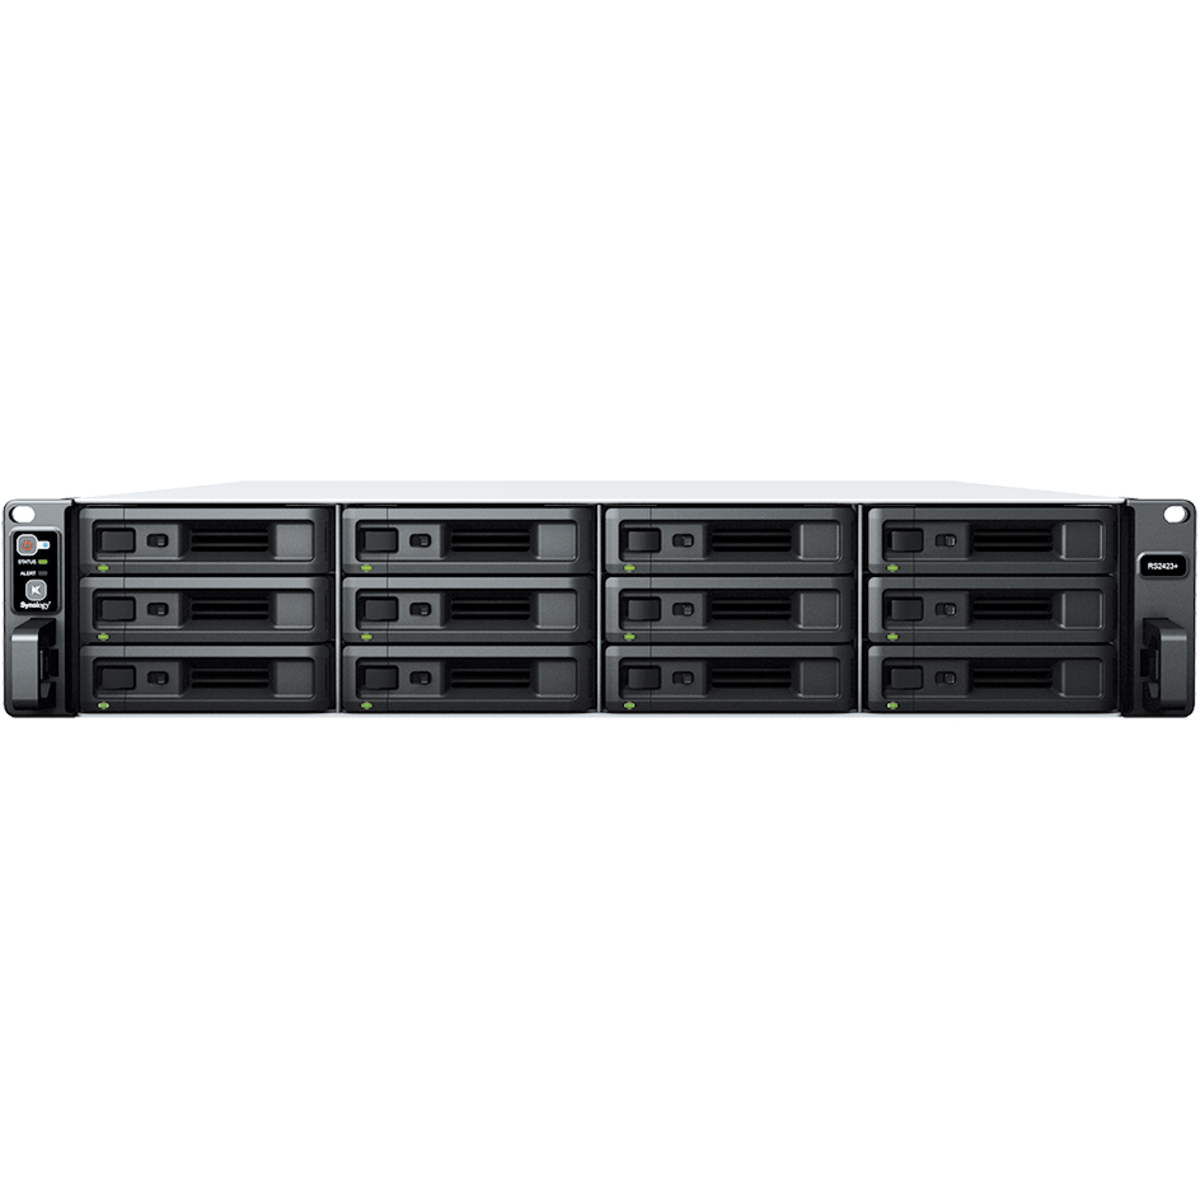 buy Synology RackStation RS2423+ 240tb RackMount NAS - Network Attached Storage Device 12x20000gb Seagate IronWolf Pro ST20000NT001 3.5 7200rpm SATA 6Gb/s HDD NAS Class Drives Installed - Burn-In Tested - ON SALE - nas headquarters buy network attached storage server device das new raid-5 free shipping simply usa christmas holiday black friday cyber monday week sale happening now! RackStation RS2423+